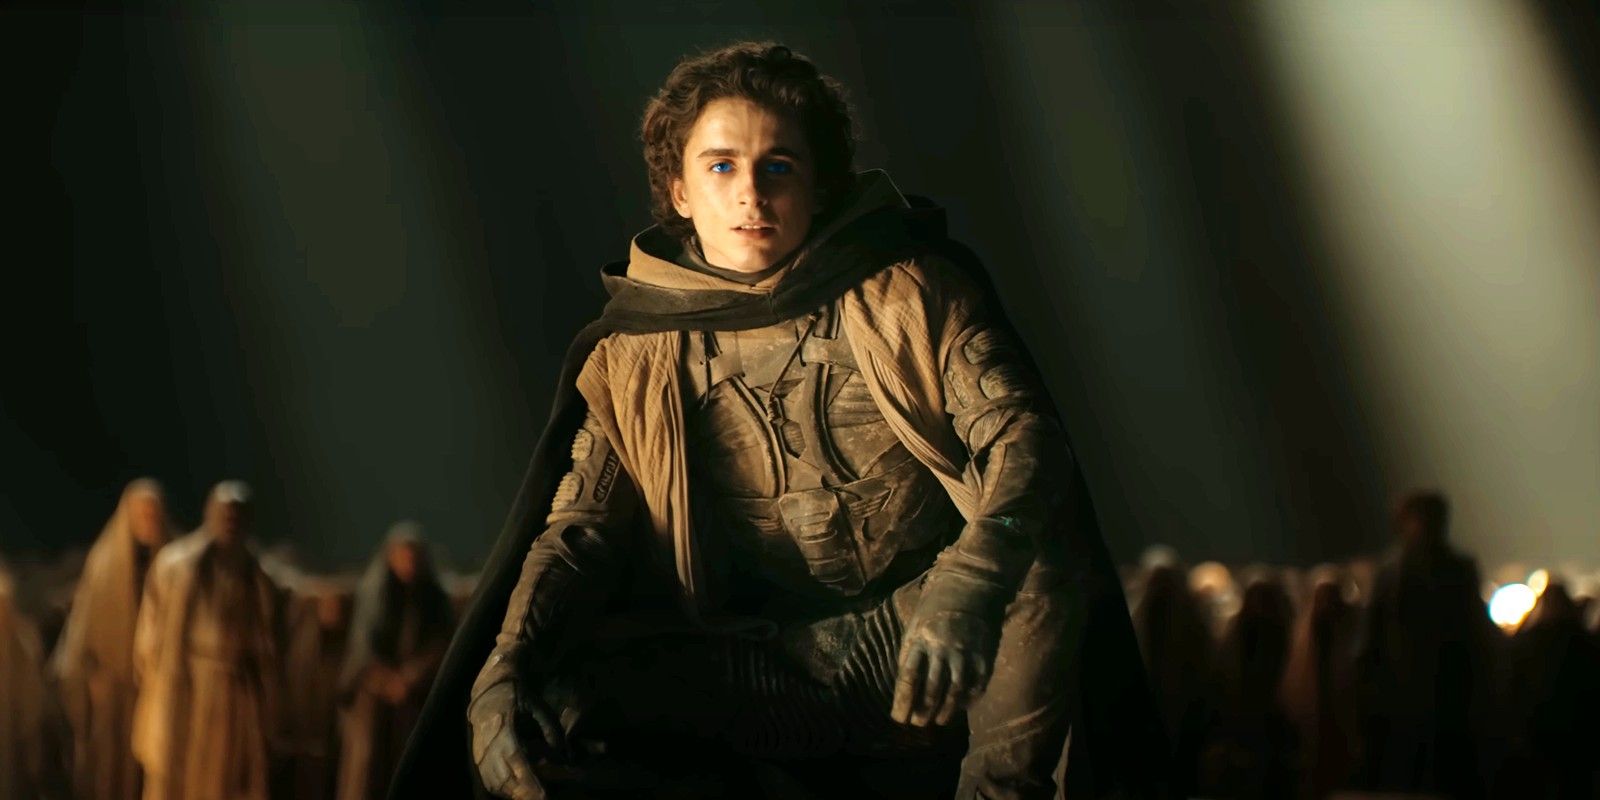 Paul Atreides played by actor Timothée Chalamet looking at the Fremen as he gives his speech in Dune 2